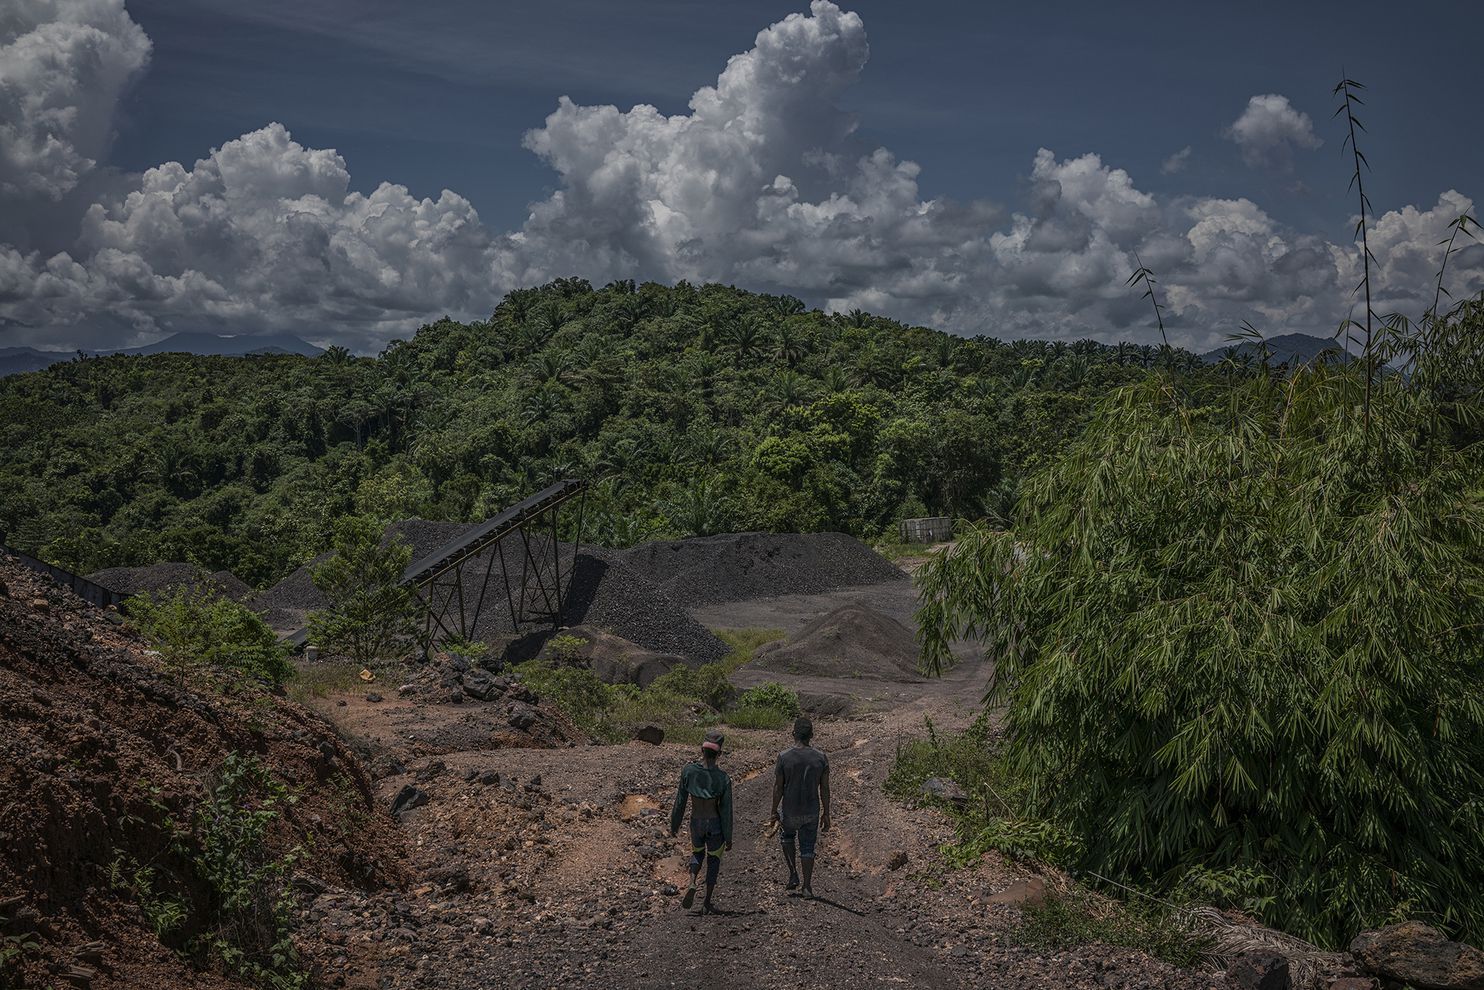 Hassan, left, and Li walk through the manganese mine processing area right above their Kuala Koh settlement. Image by James Whitlow Delano. Malaysia, 2019.